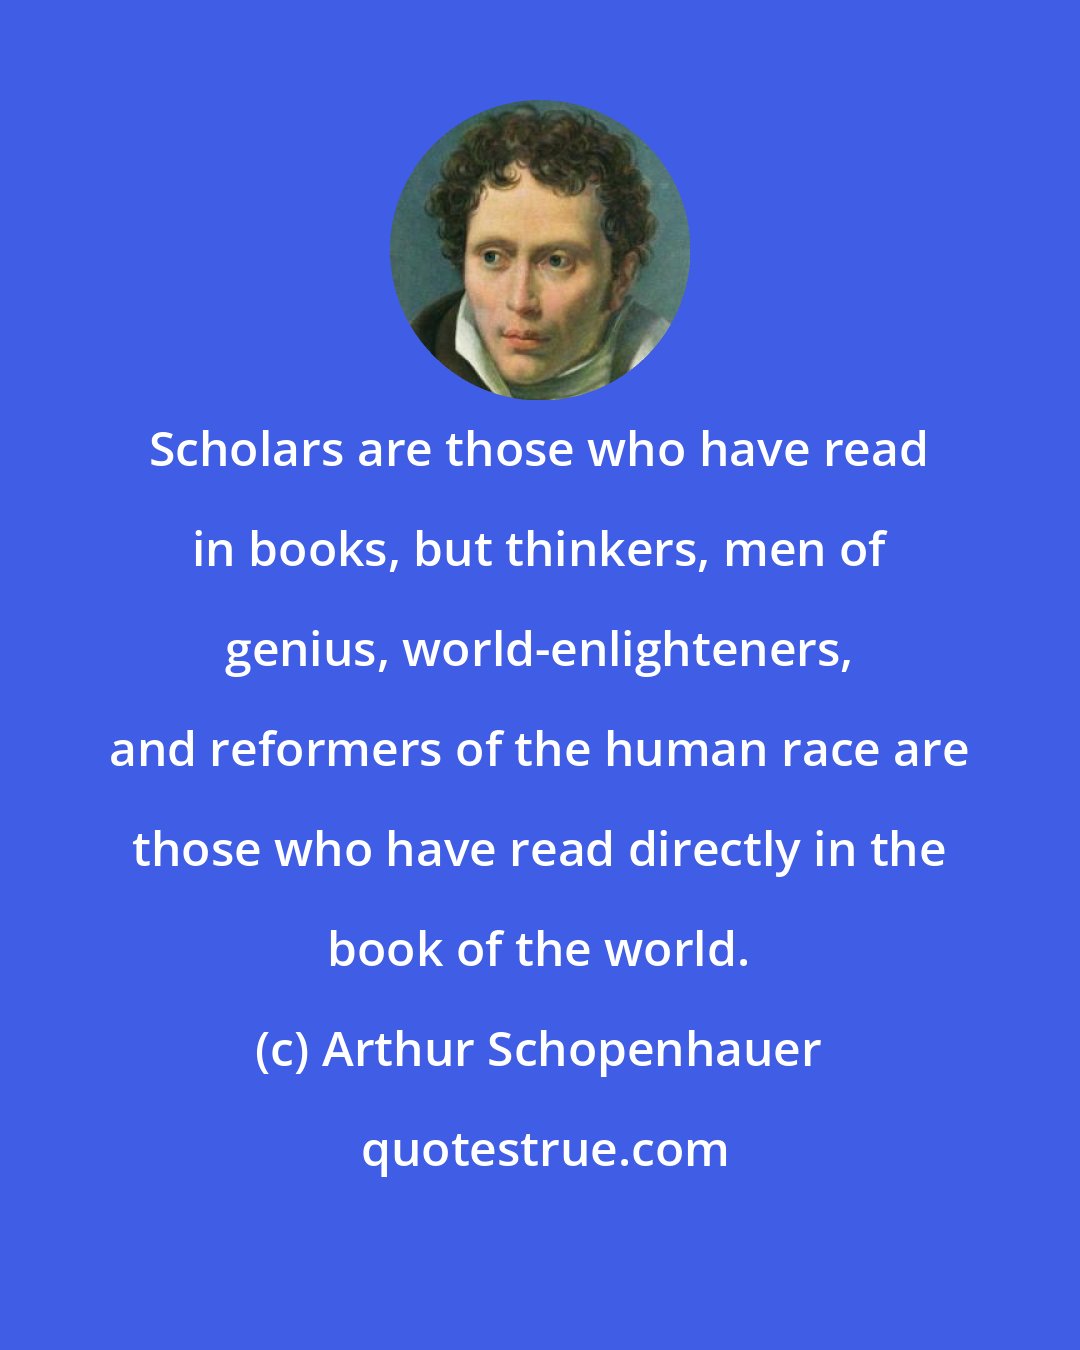 Arthur Schopenhauer: Scholars are those who have read in books, but thinkers, men of genius, world-enlighteners, and reformers of the human race are those who have read directly in the book of the world.